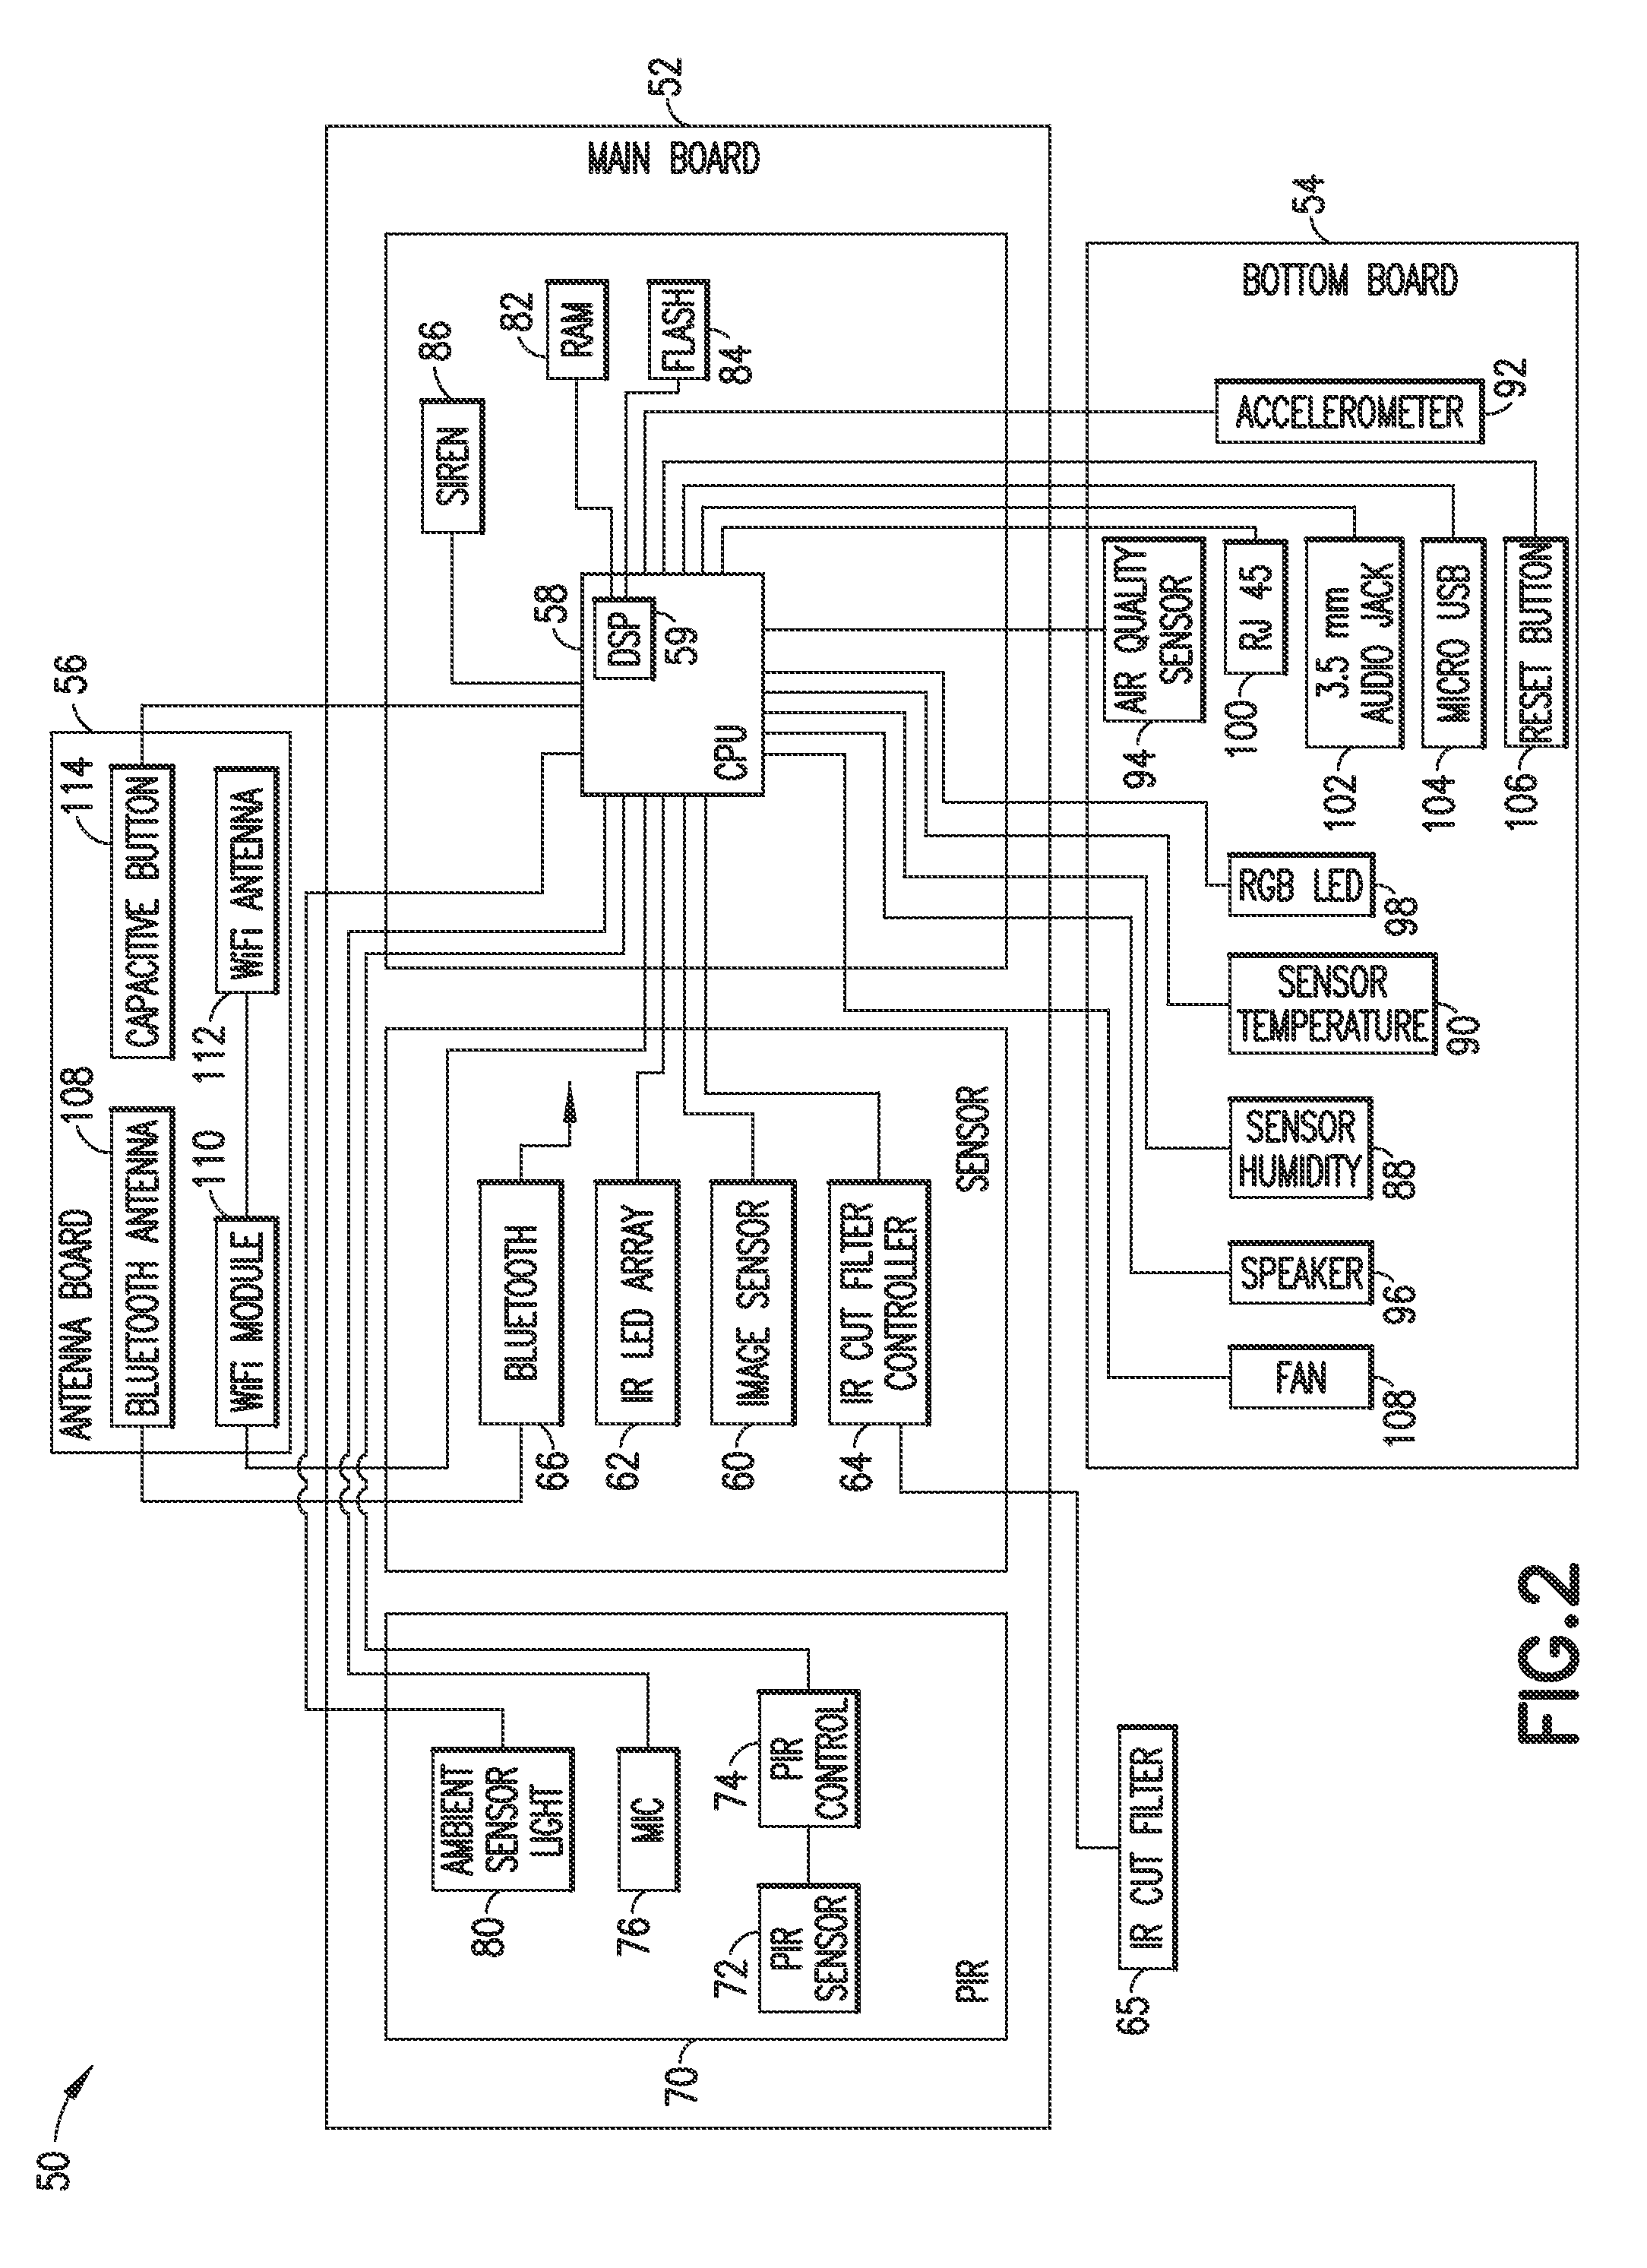 Monitoring and security devices comprising multiple sensors